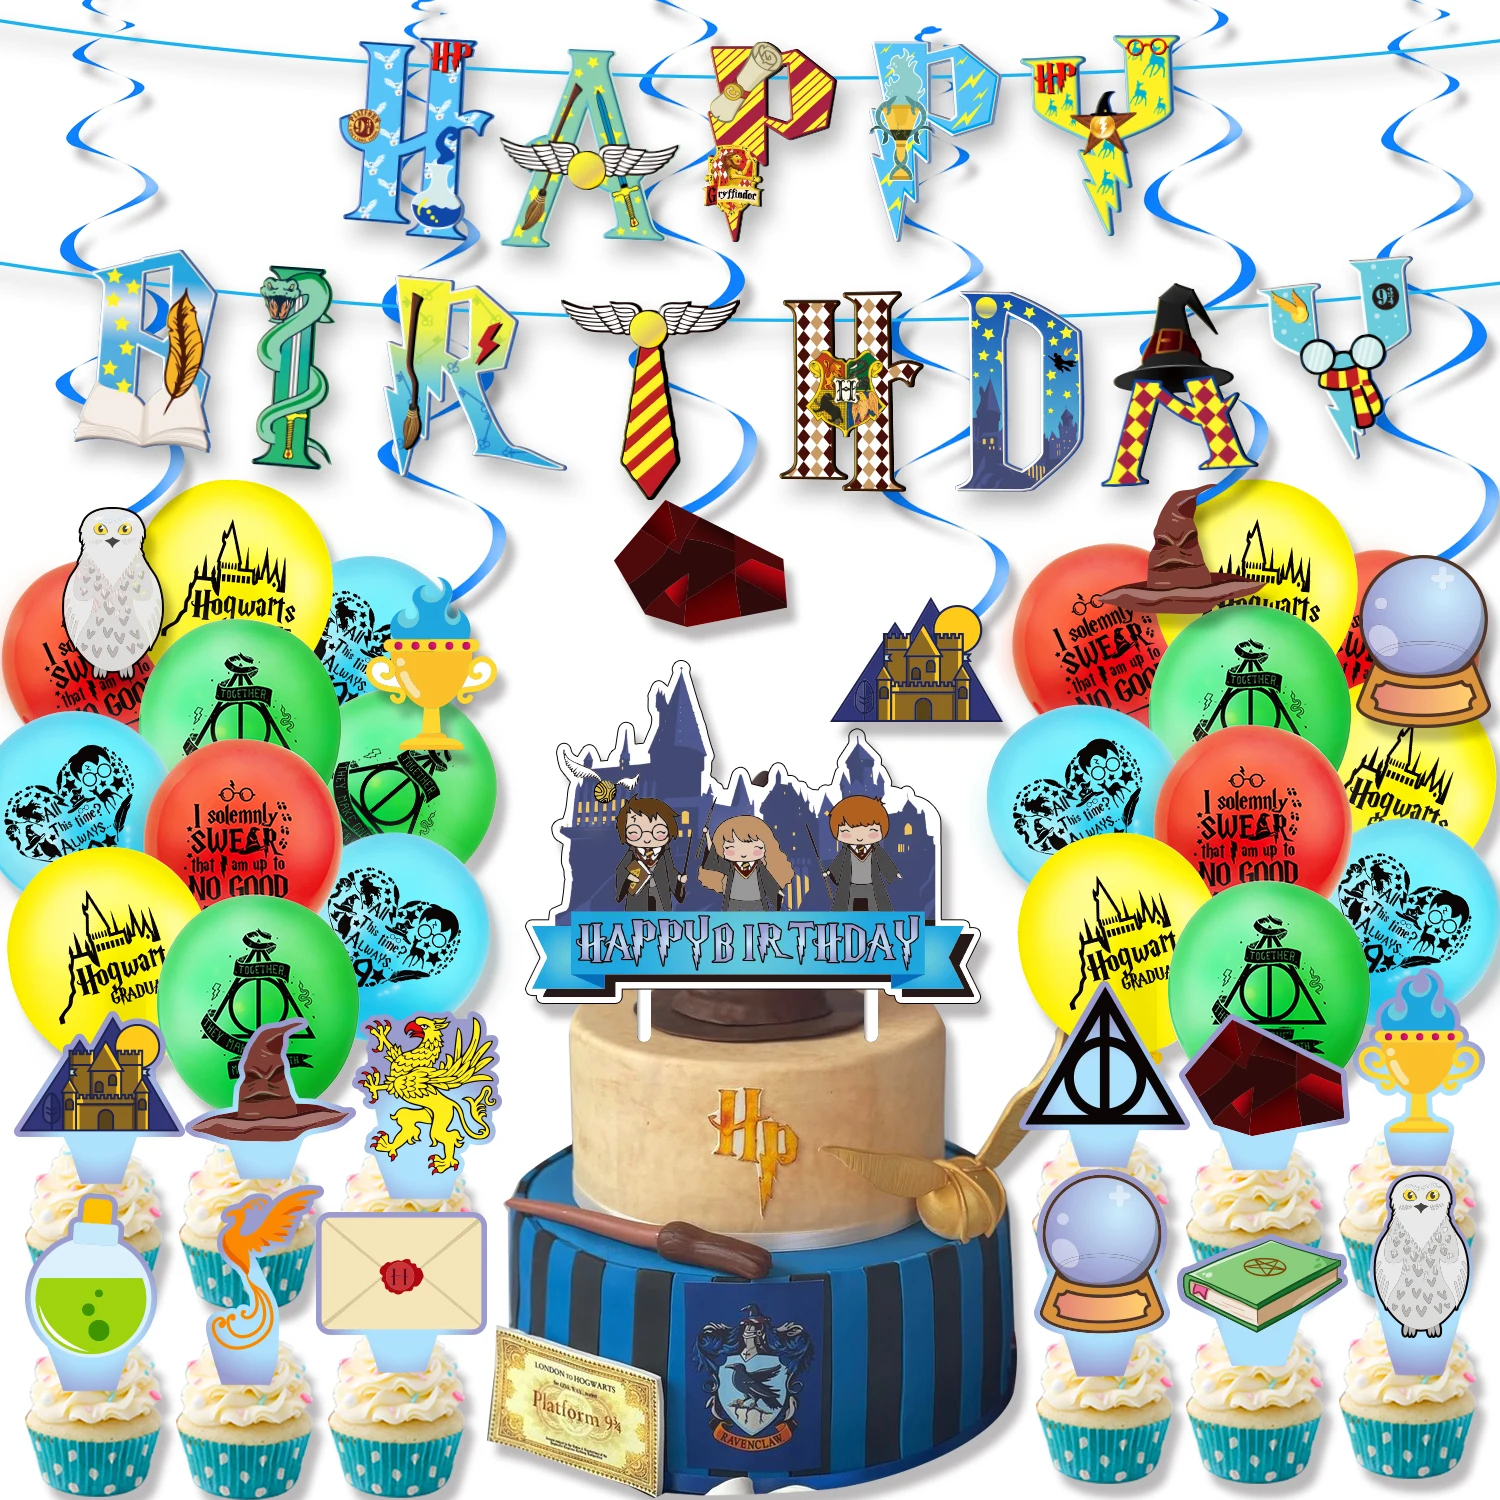 2021 New Harried Superise Theme Birthday Party Decoration Set Wizard Pull  Flag Wizard Hat Potter Glasses Cake Card Balloon - Action Figures -  AliExpress